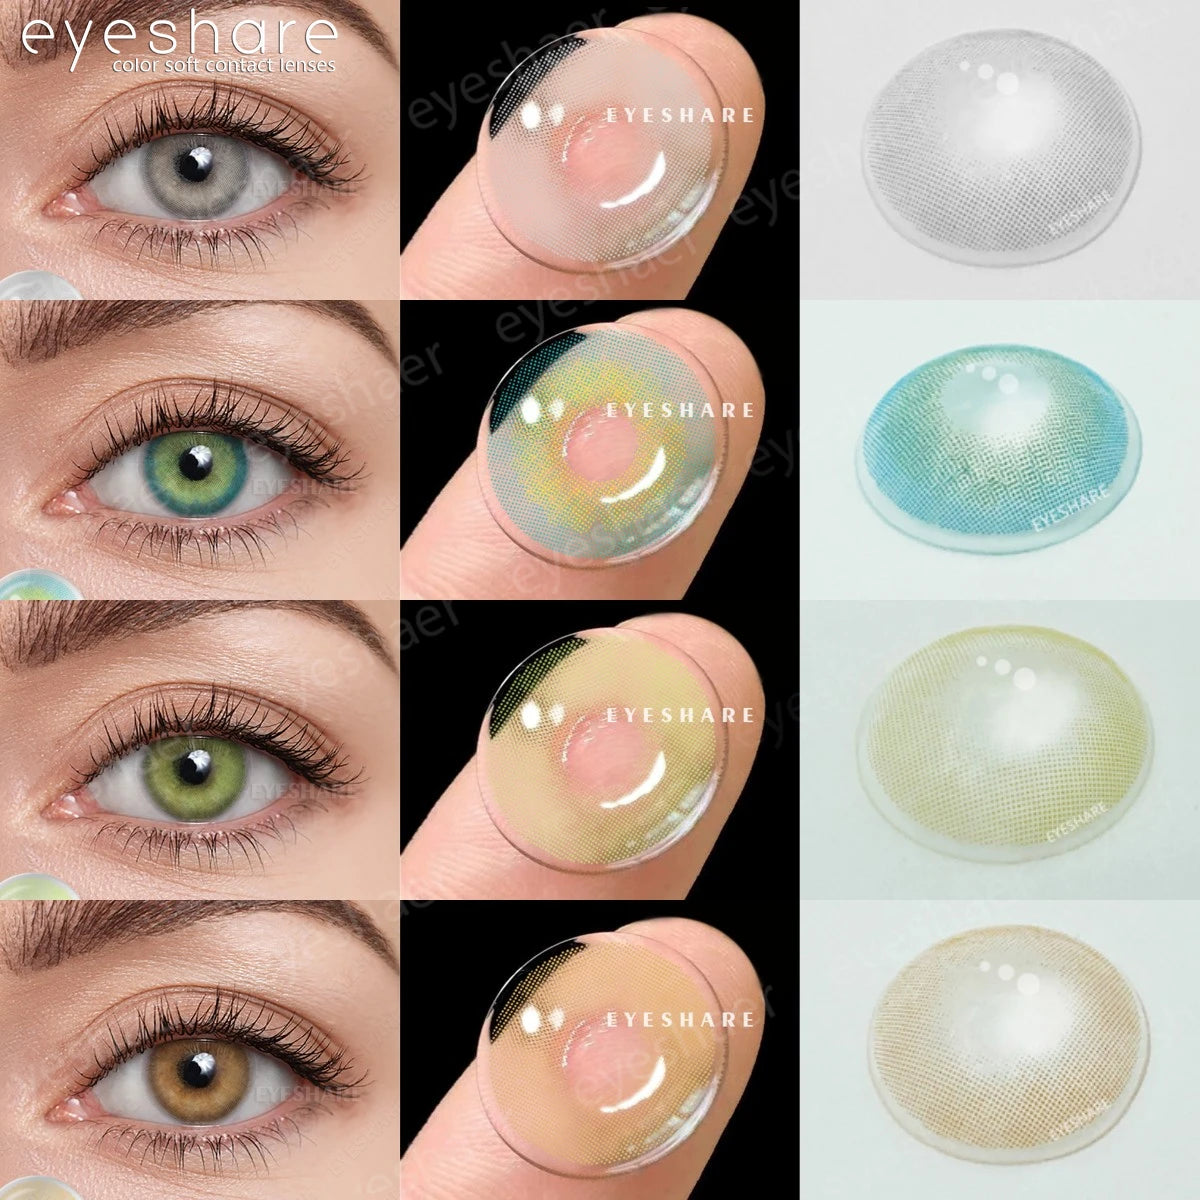 EYESHARE 1Pair Natural Contact Colored Lenses For Eyes Multicolor Lens Soft Yearly Fashion blue Eye Contact Pupils Beauty Makeup